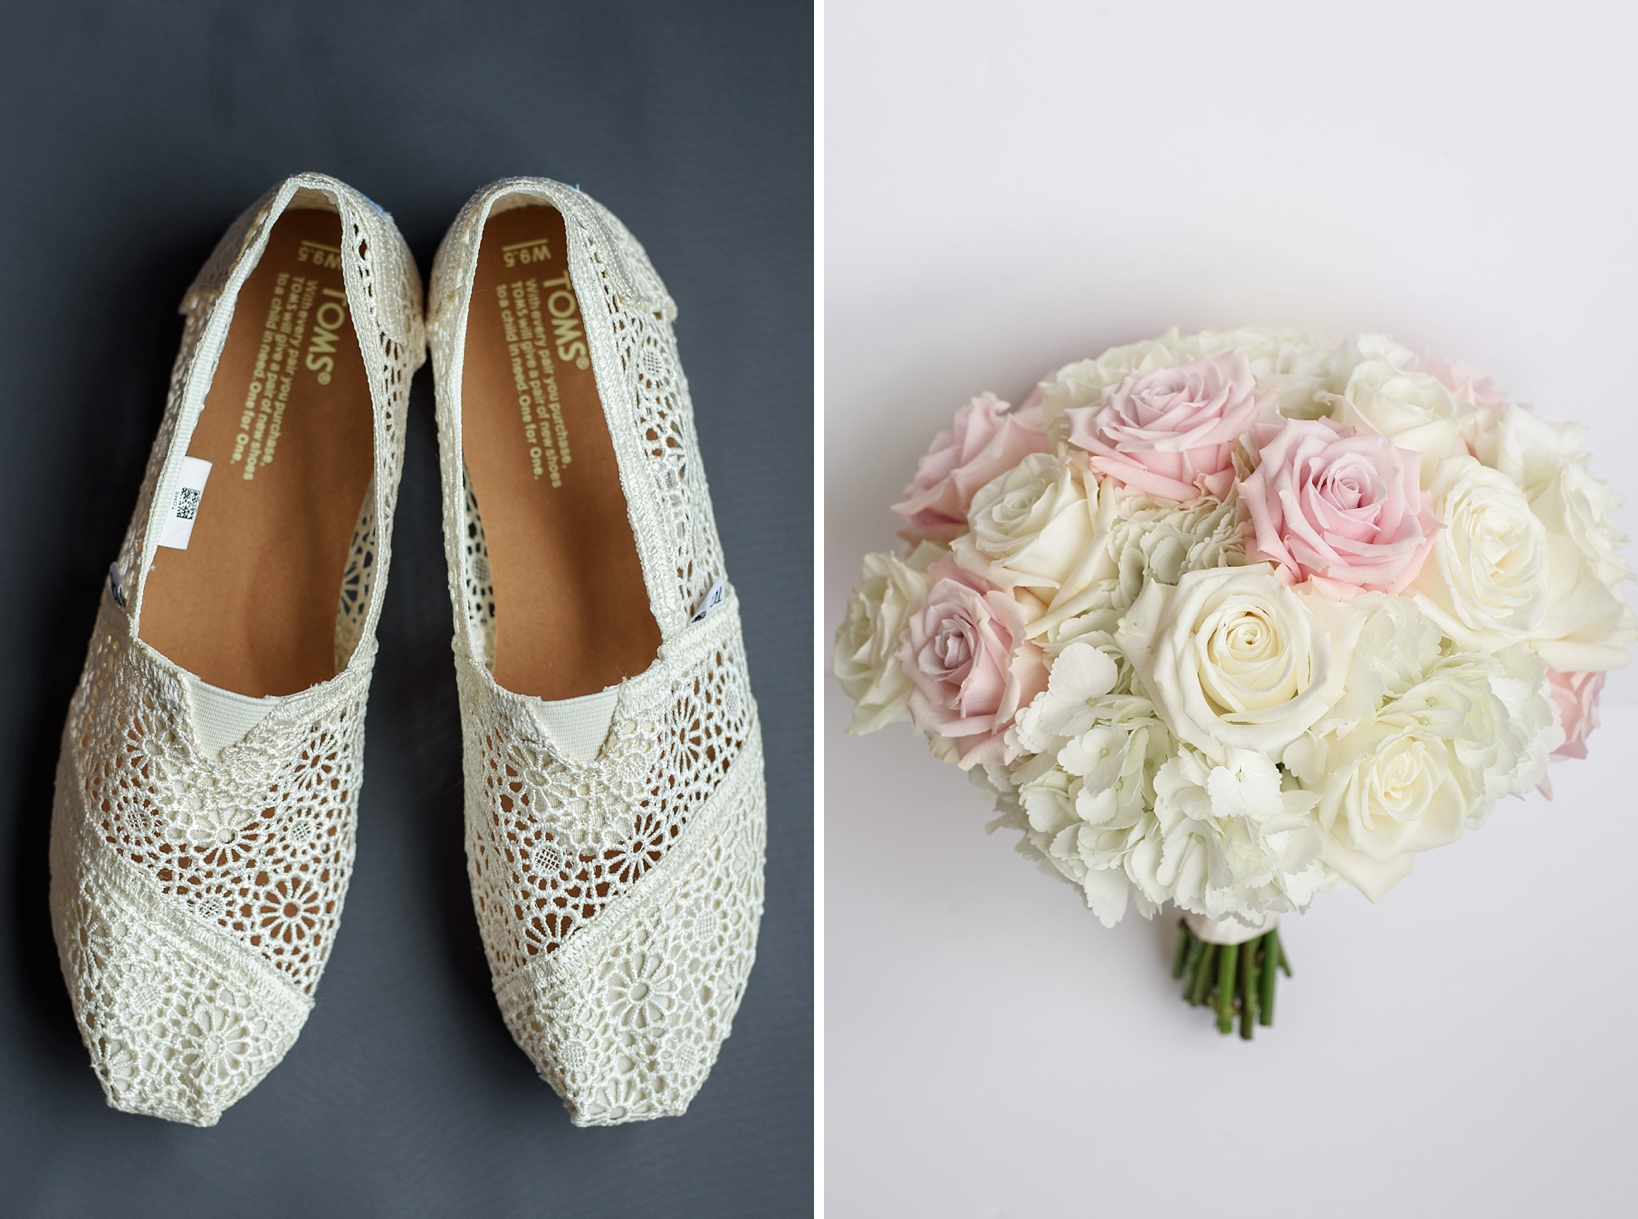 Bridal shoes and a view from above of the bridal bouquet